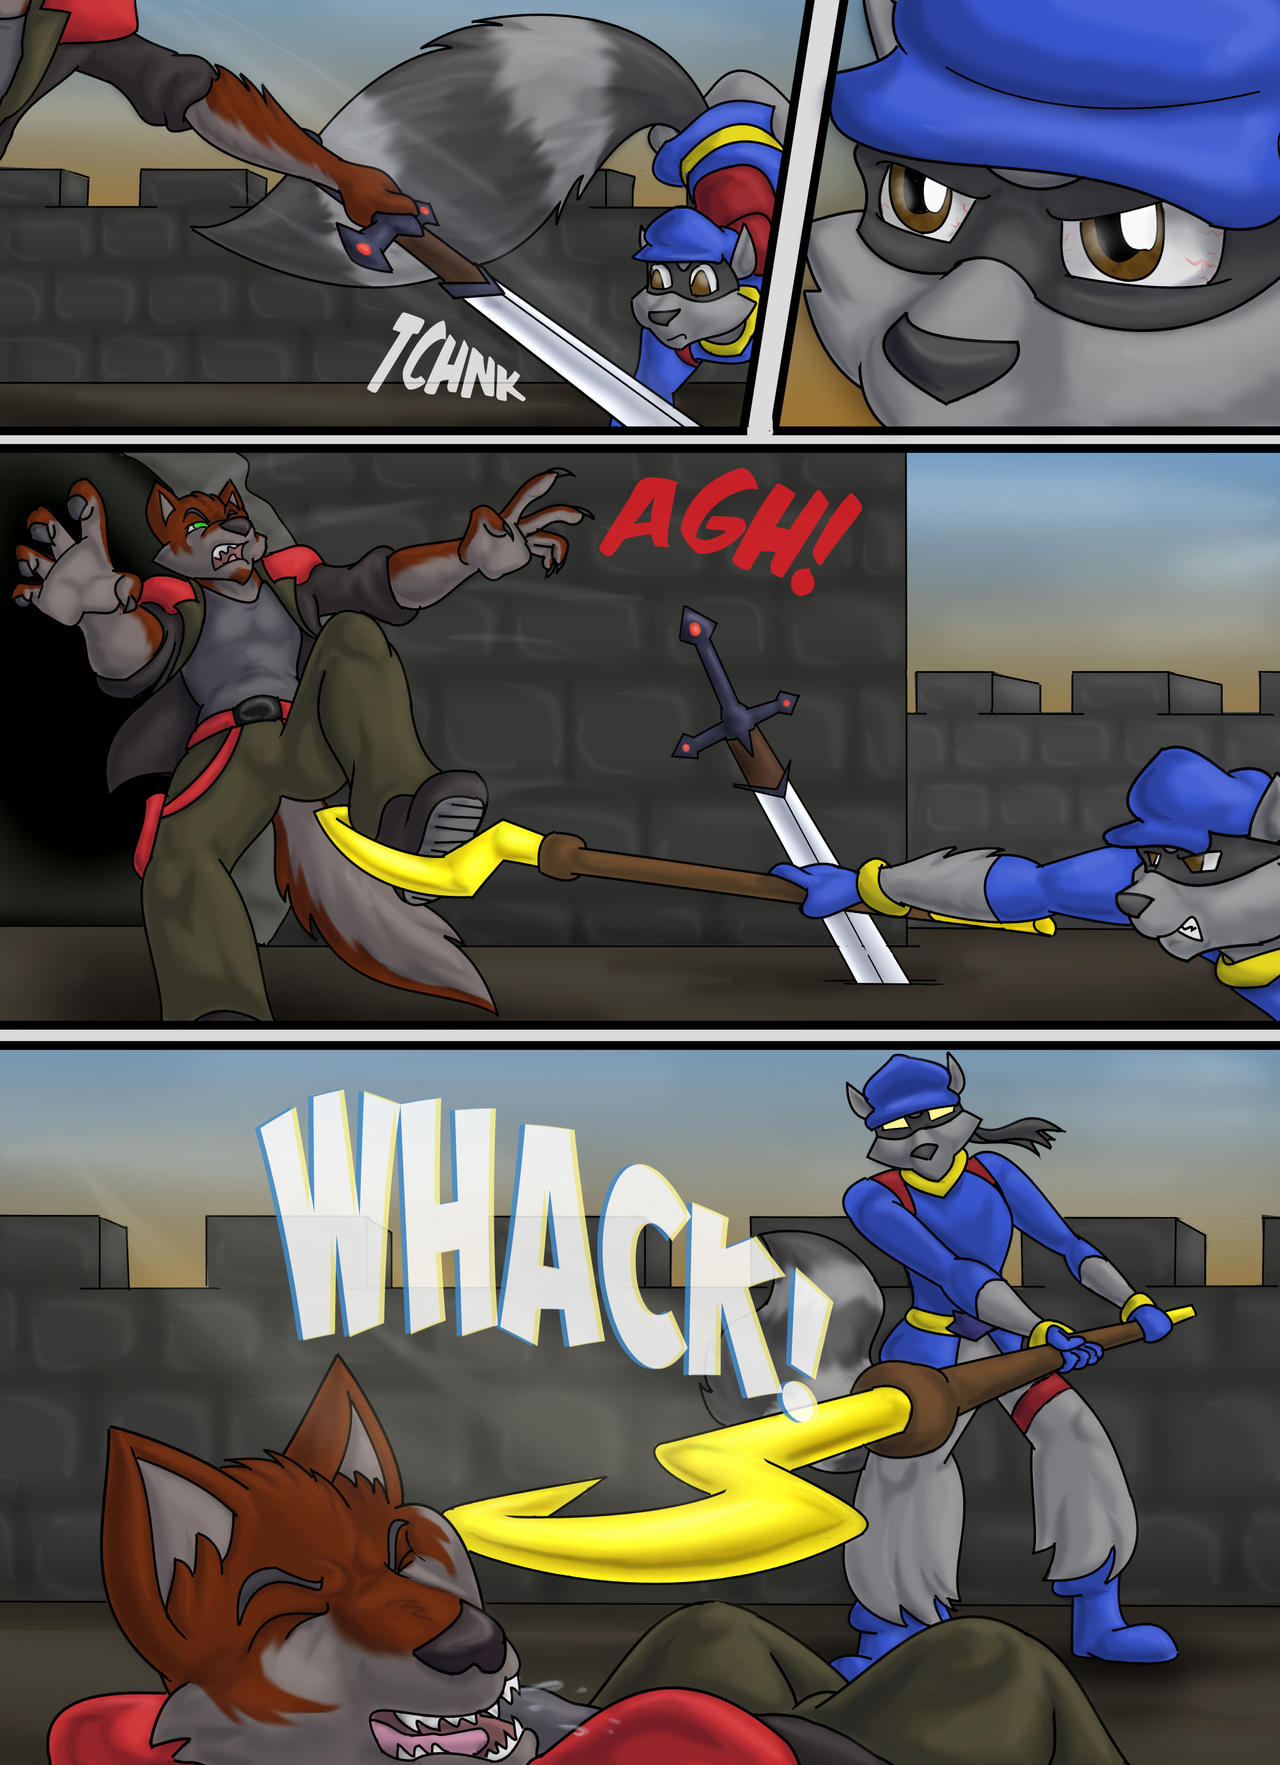 Sly Cooper: Thief of Virtue Page 5 by ConnorDavidson on DeviantArt